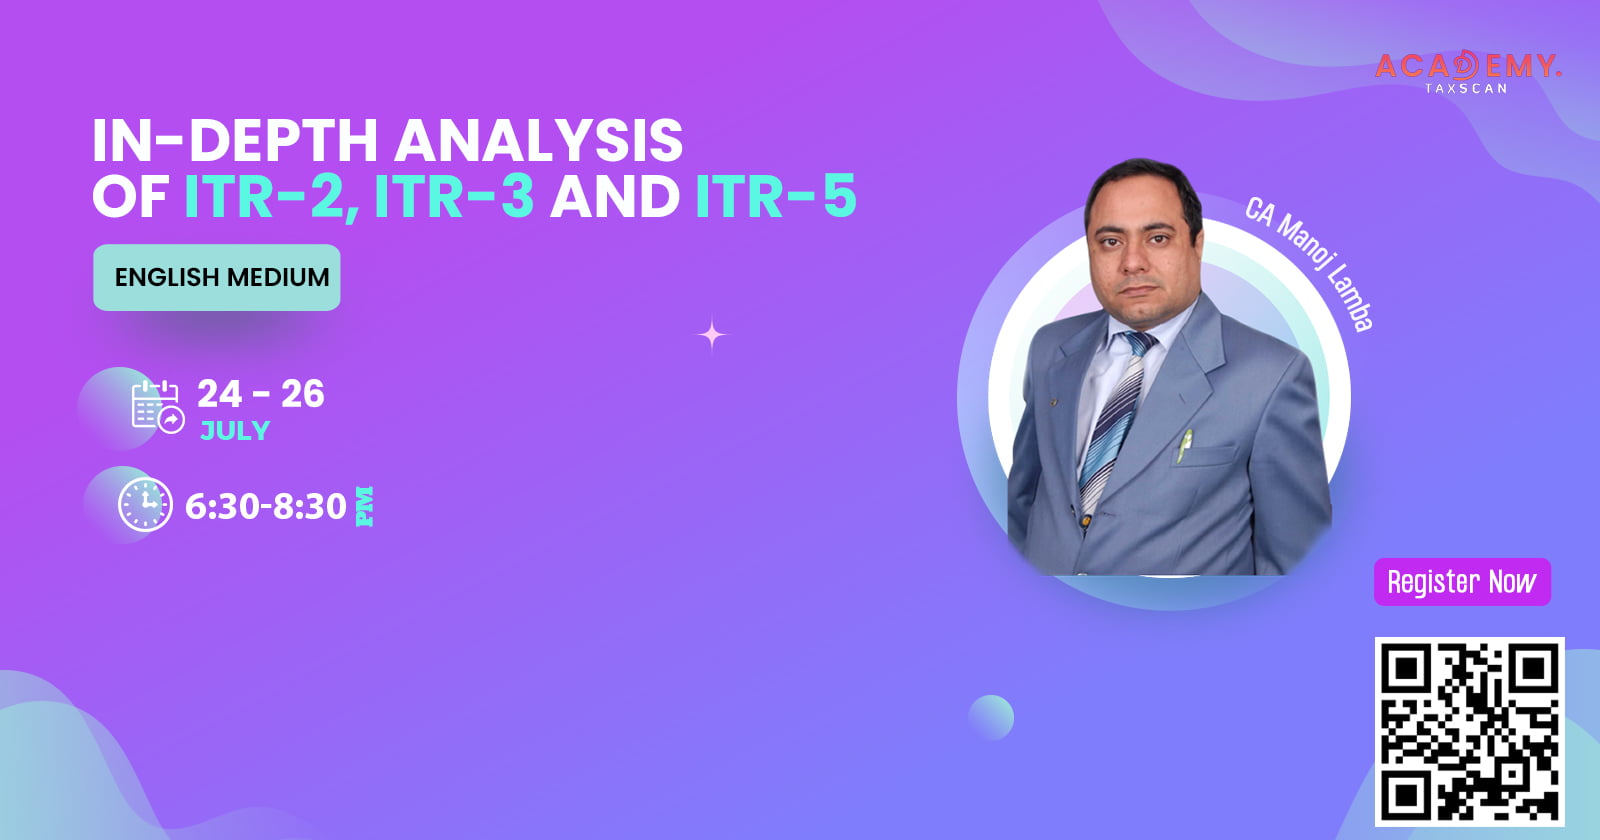 In-depth Analysis of ITR - In-depth Analysis - ITR - ITR-2 - ITR-3 - ITR-5 - Certificate Course - online certificate course - taxscan academy